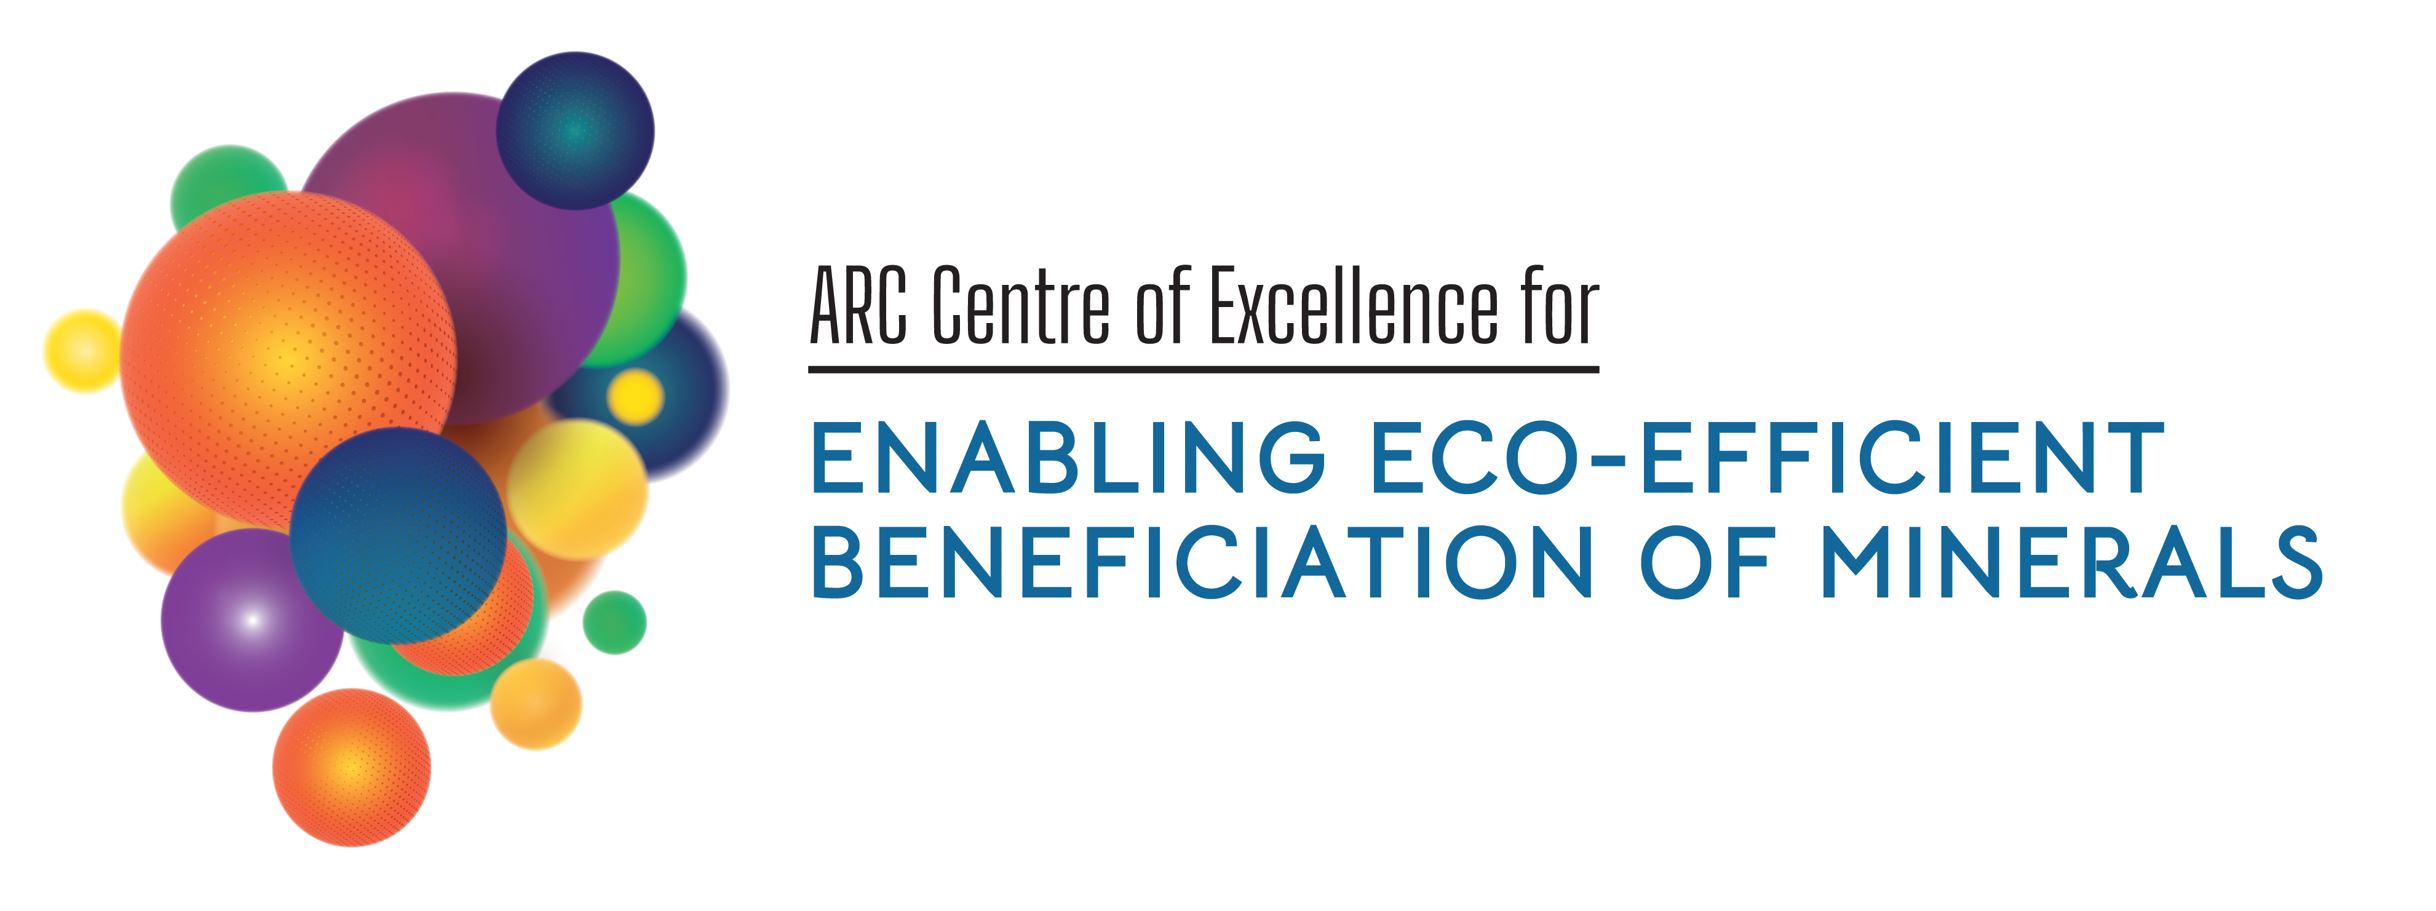 ARC Centre of Excellence For Enabling Eco-Efficient Beneficiation of Minerals logo